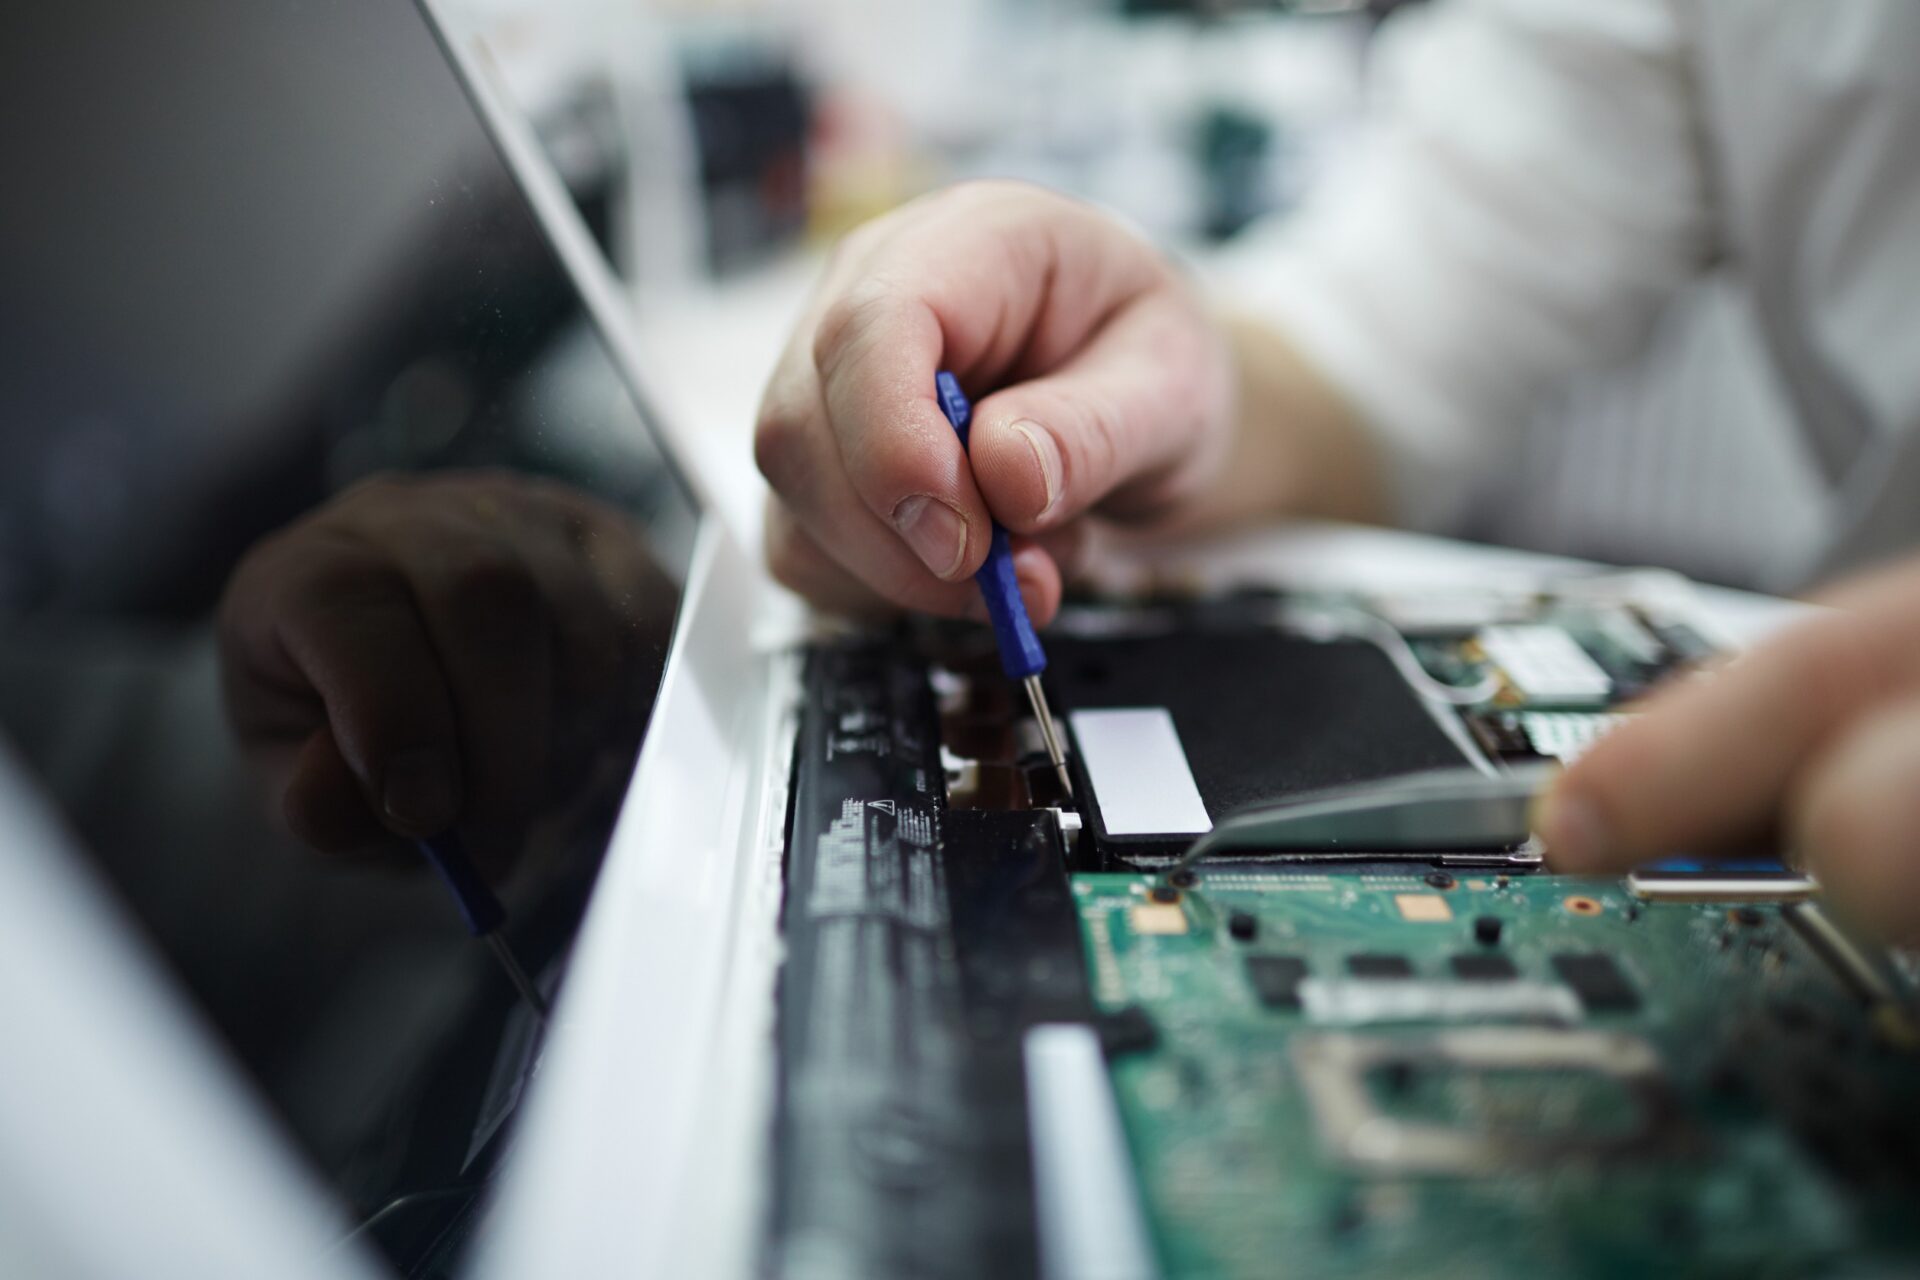 Man Fixing Components in Disassembled Laptop